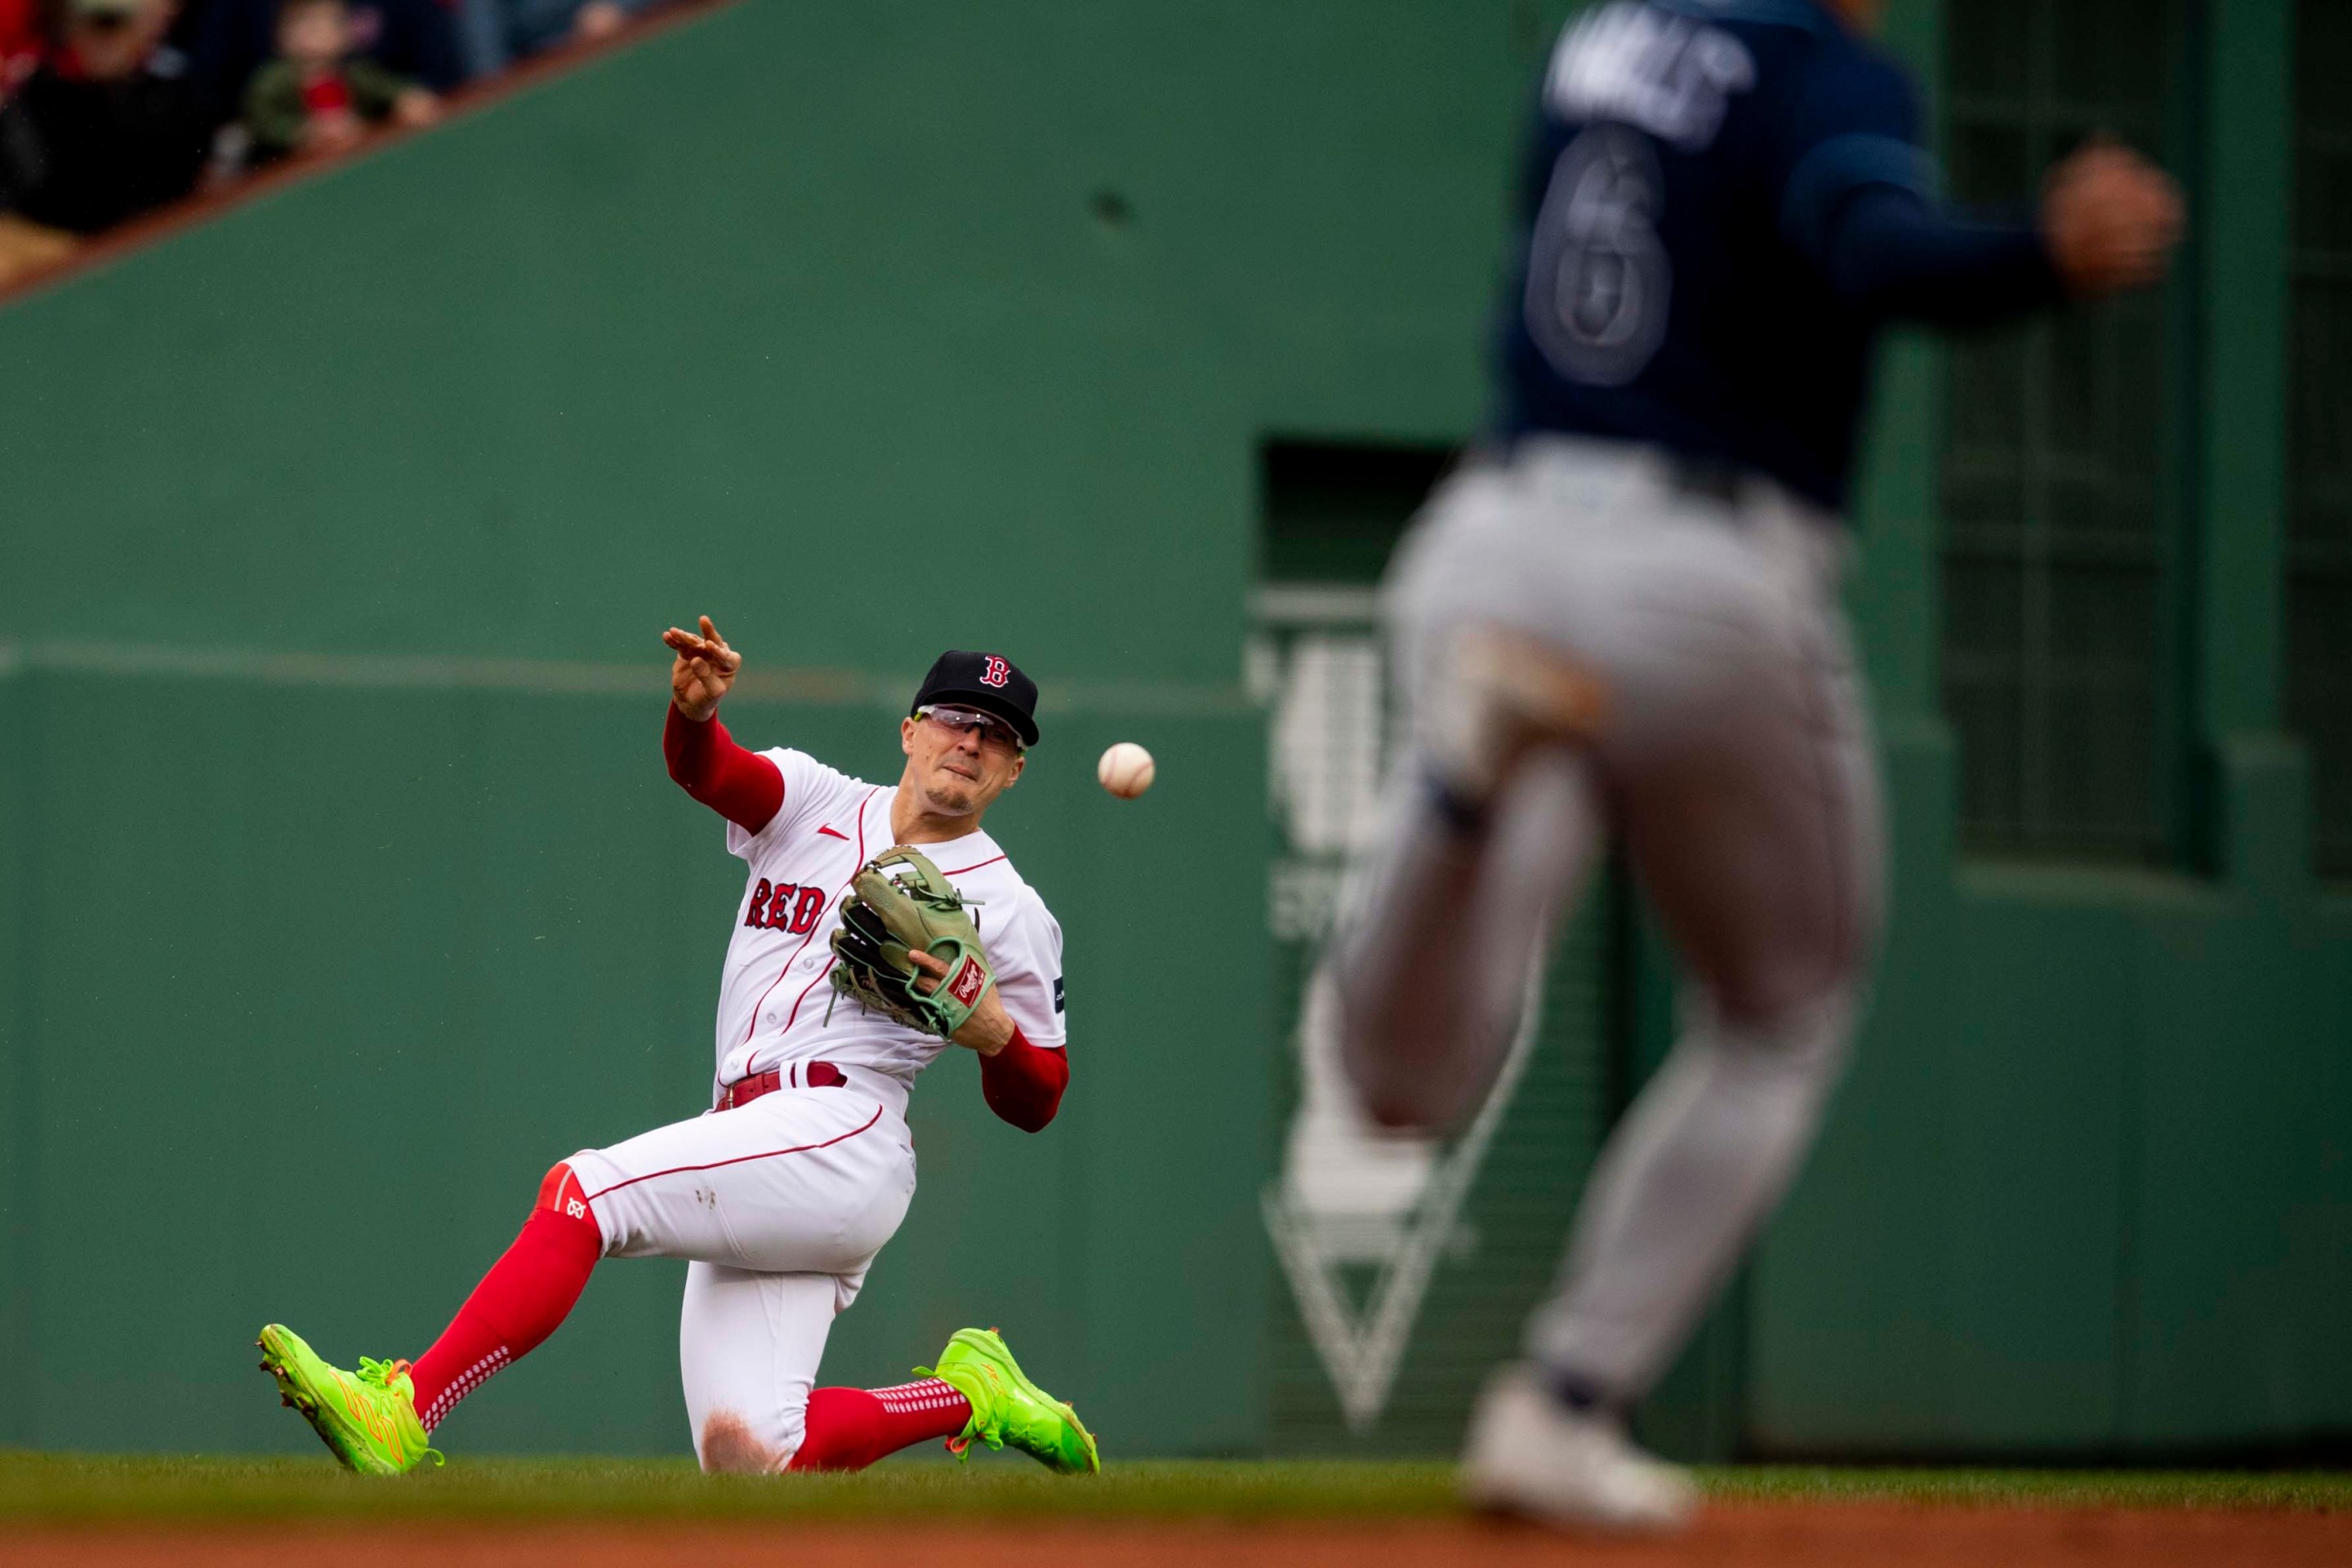 Enrique Hernandez #5 of the Boston Red Sox makes an error as he throws to second base during the second inning of a game against the Tampa Bay Rays on June 3, 2023 at Fenway Park in Boston, Massachusetts.